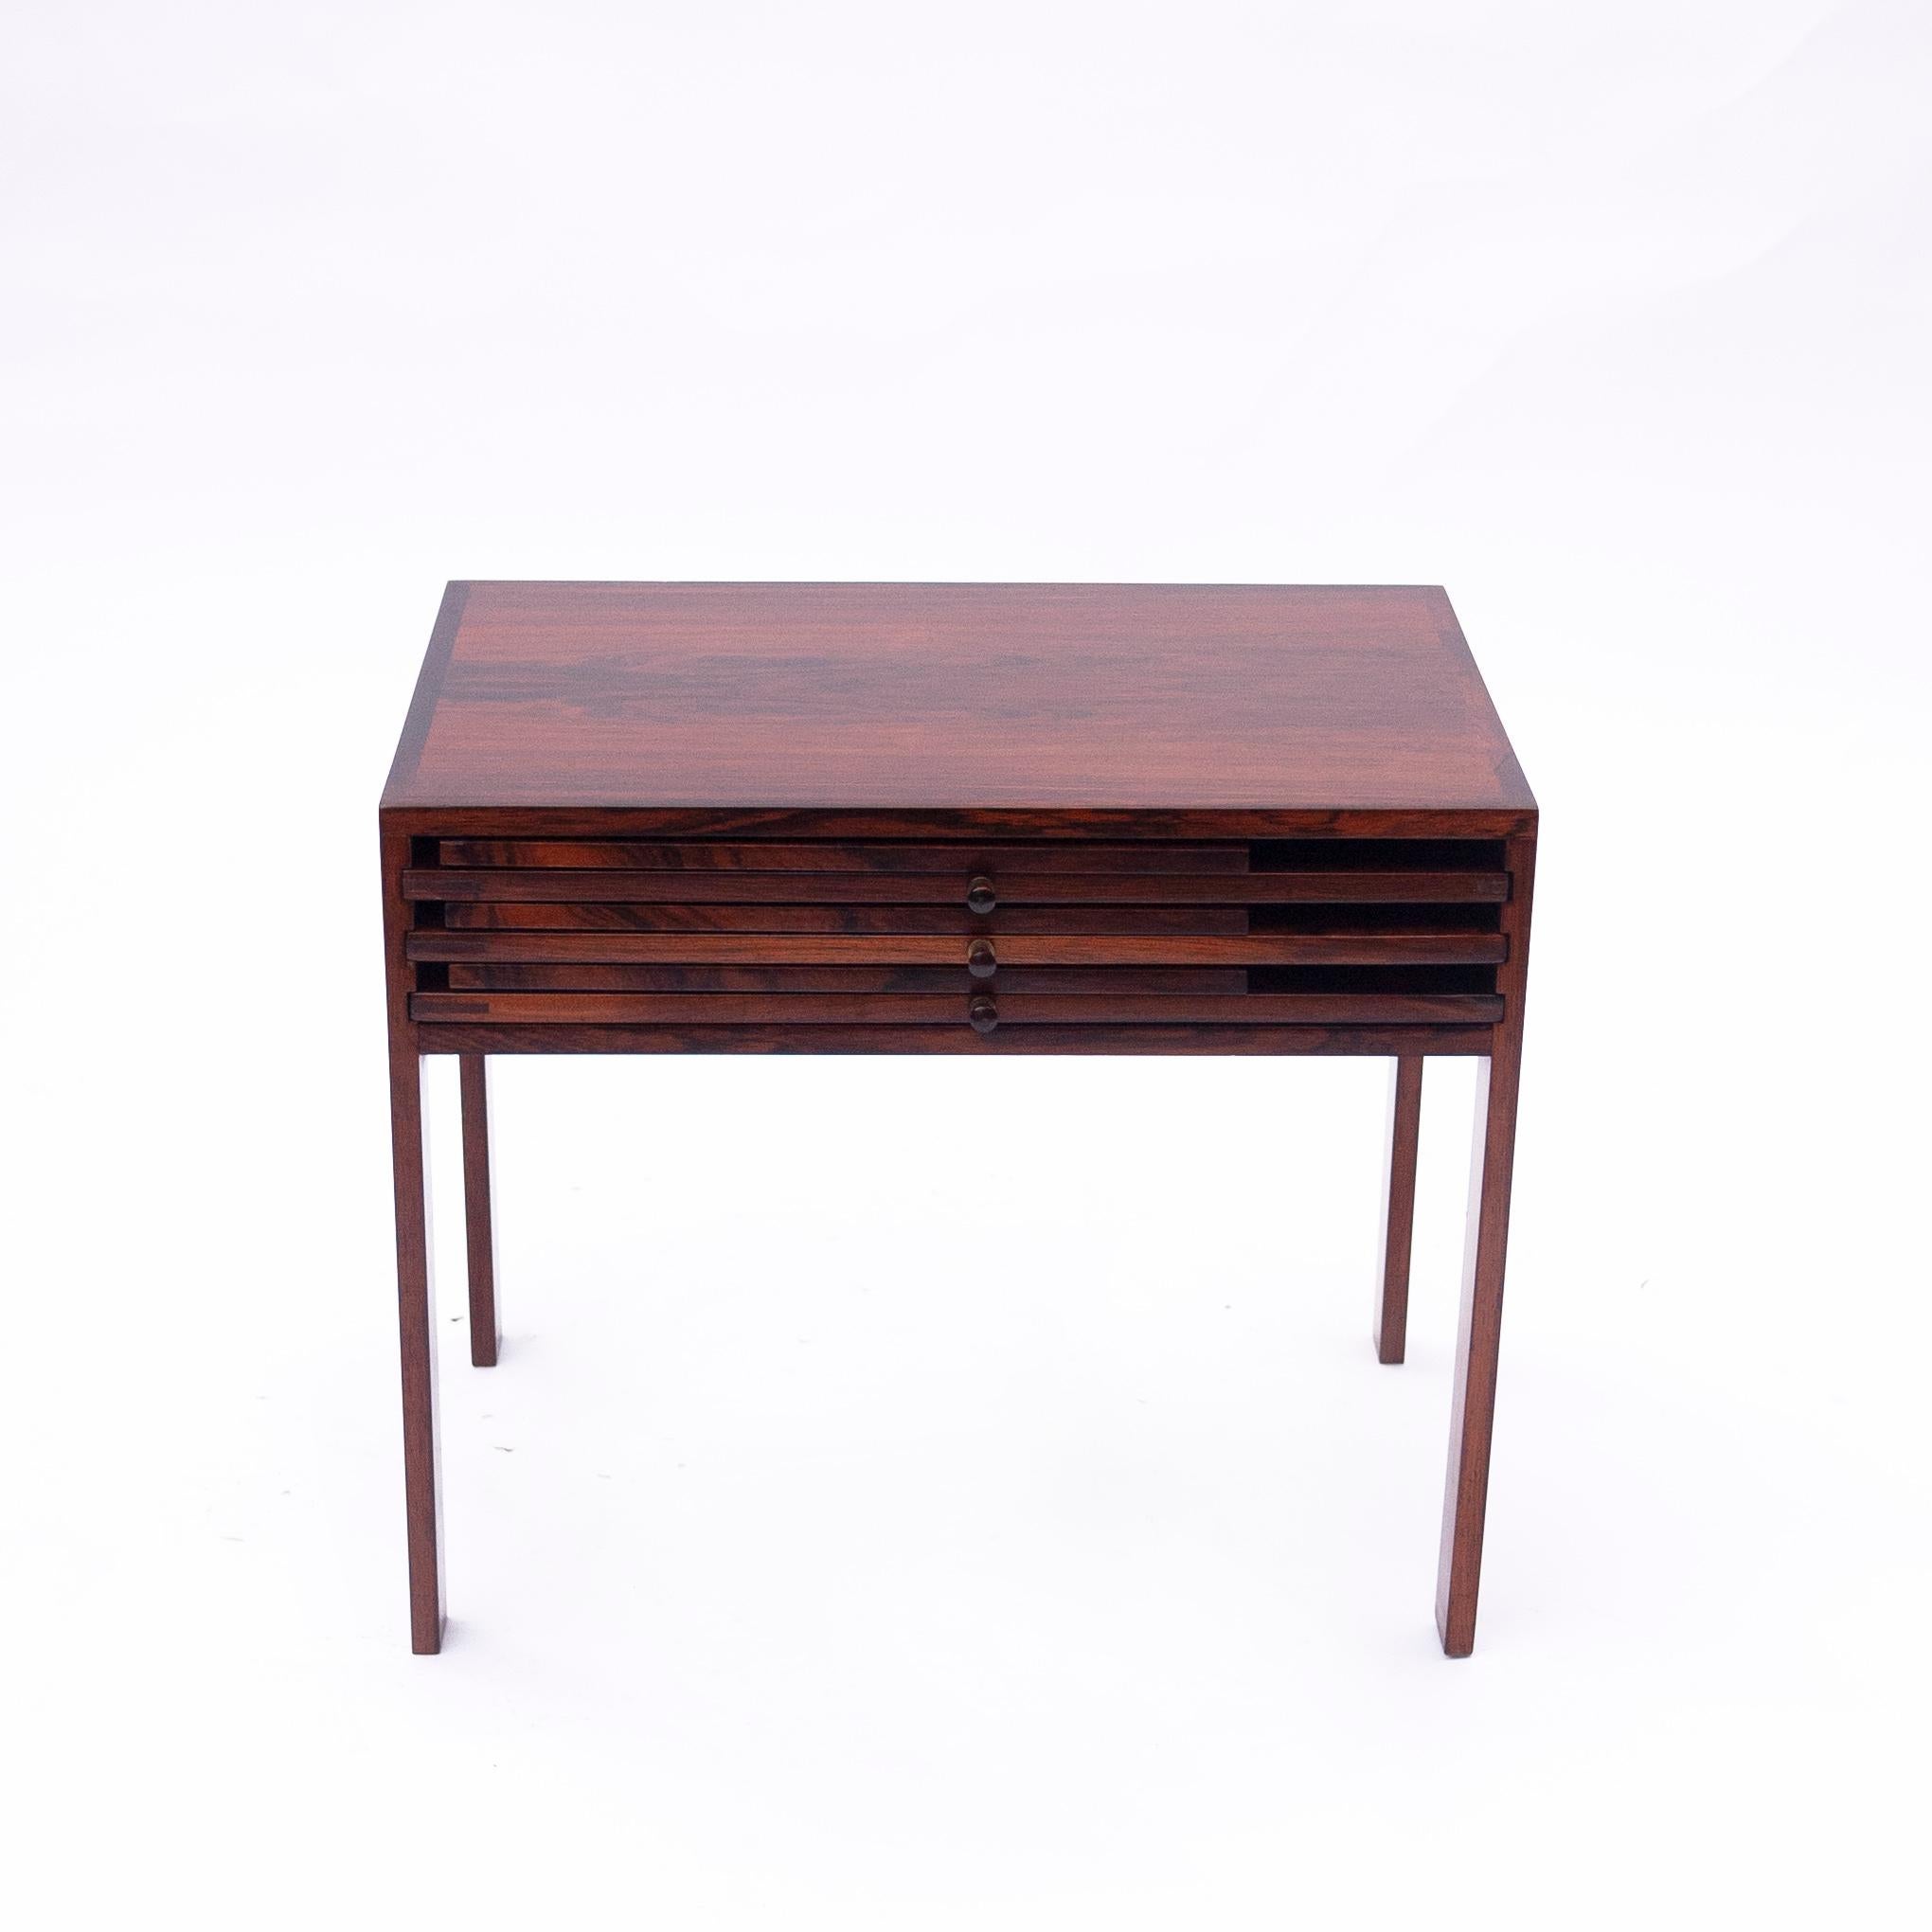 Scandinavian Nesting Tables and Side Table in Rosewood by Illum Wikkelsø, 1960s For Sale 4